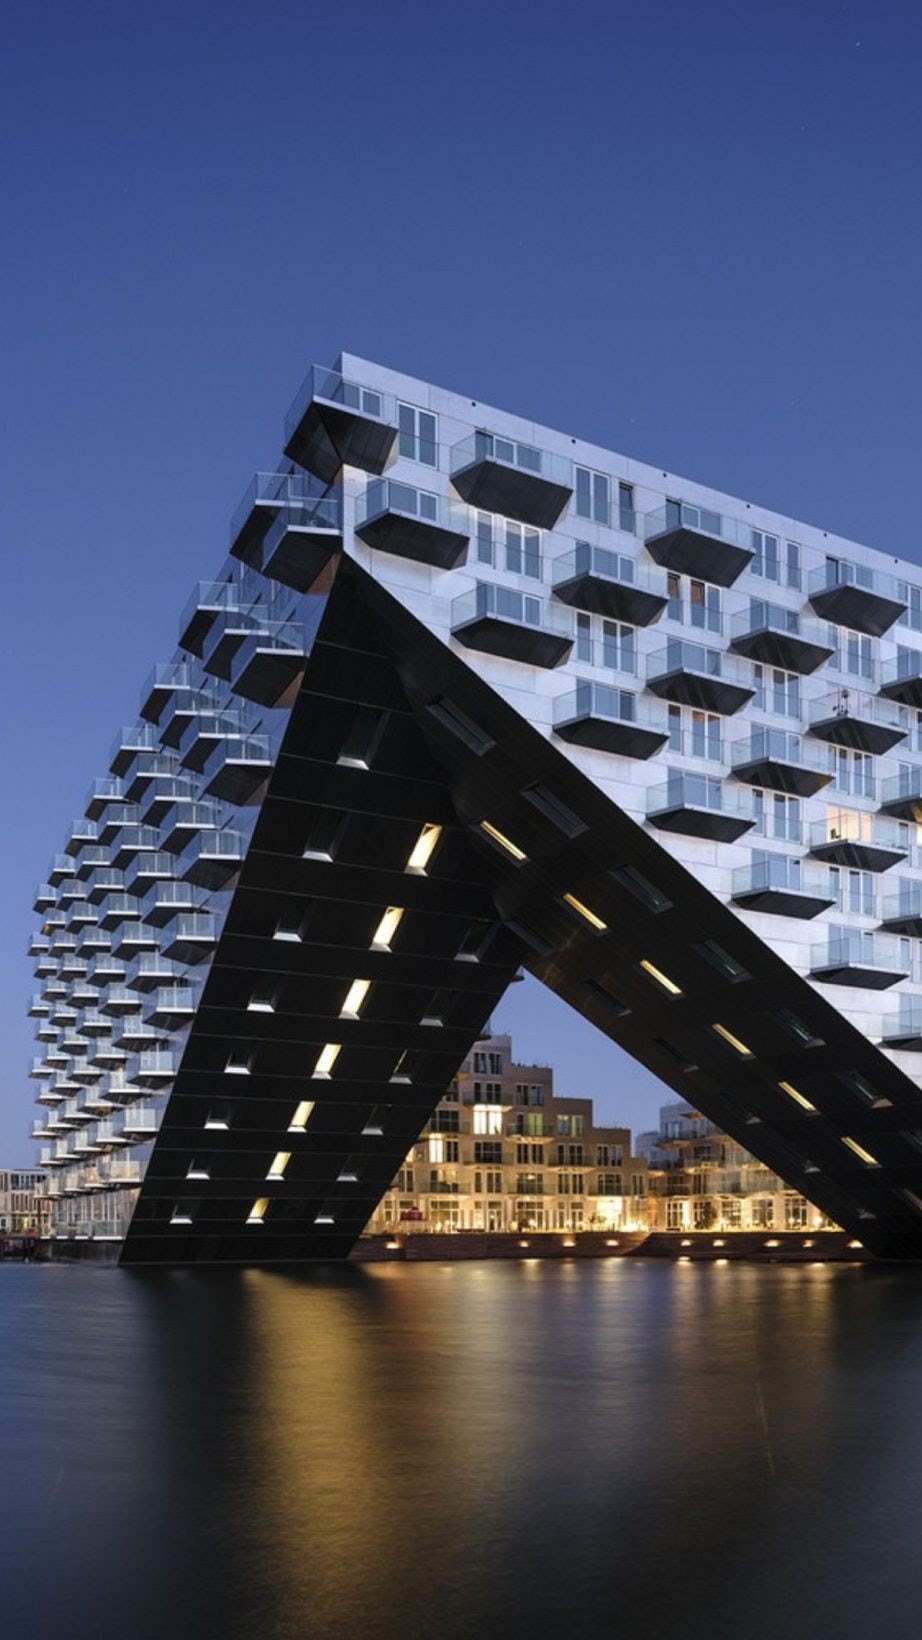 A new architectural landmark in Amsterdam